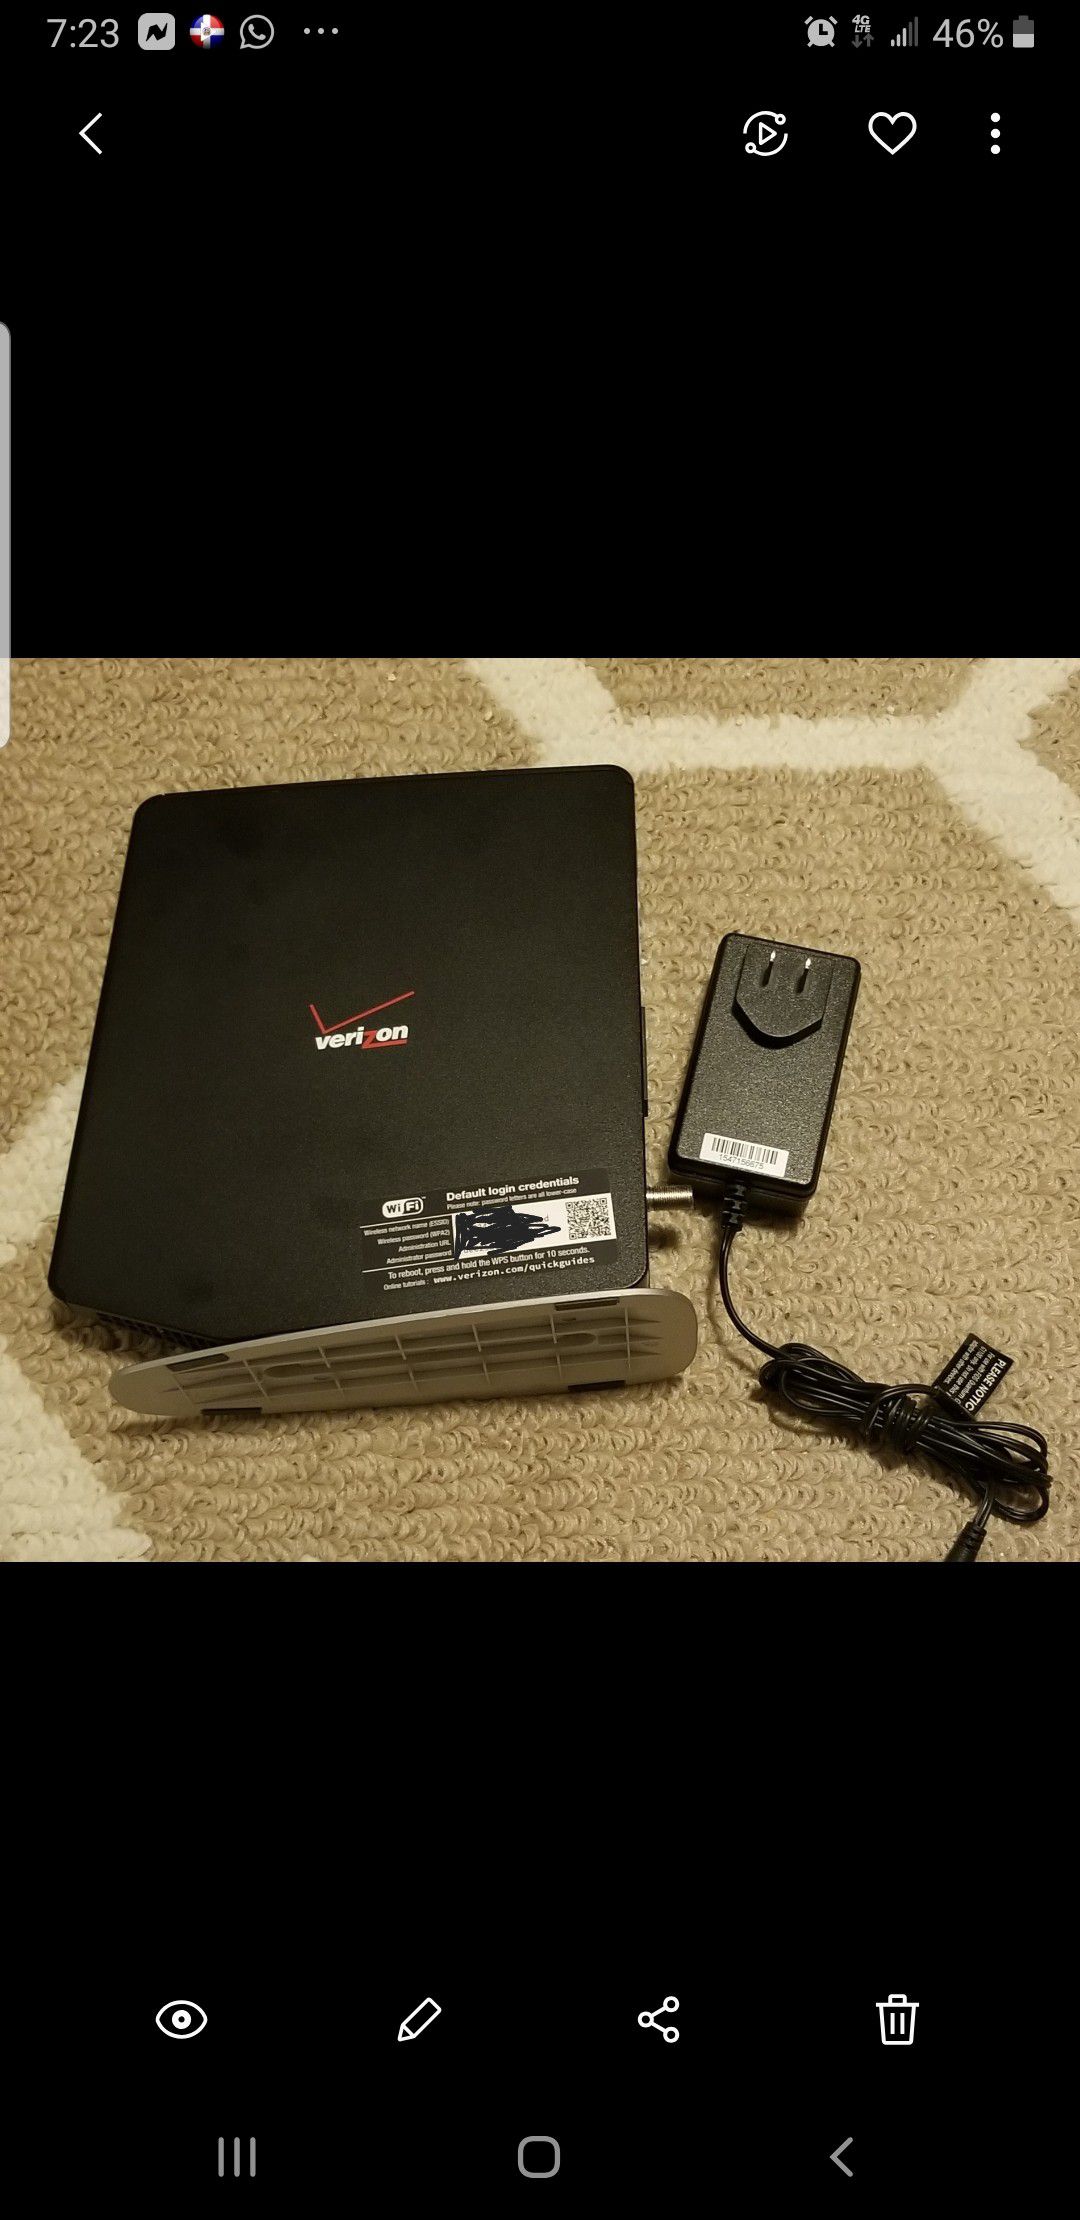 Fios g1100 router good condition